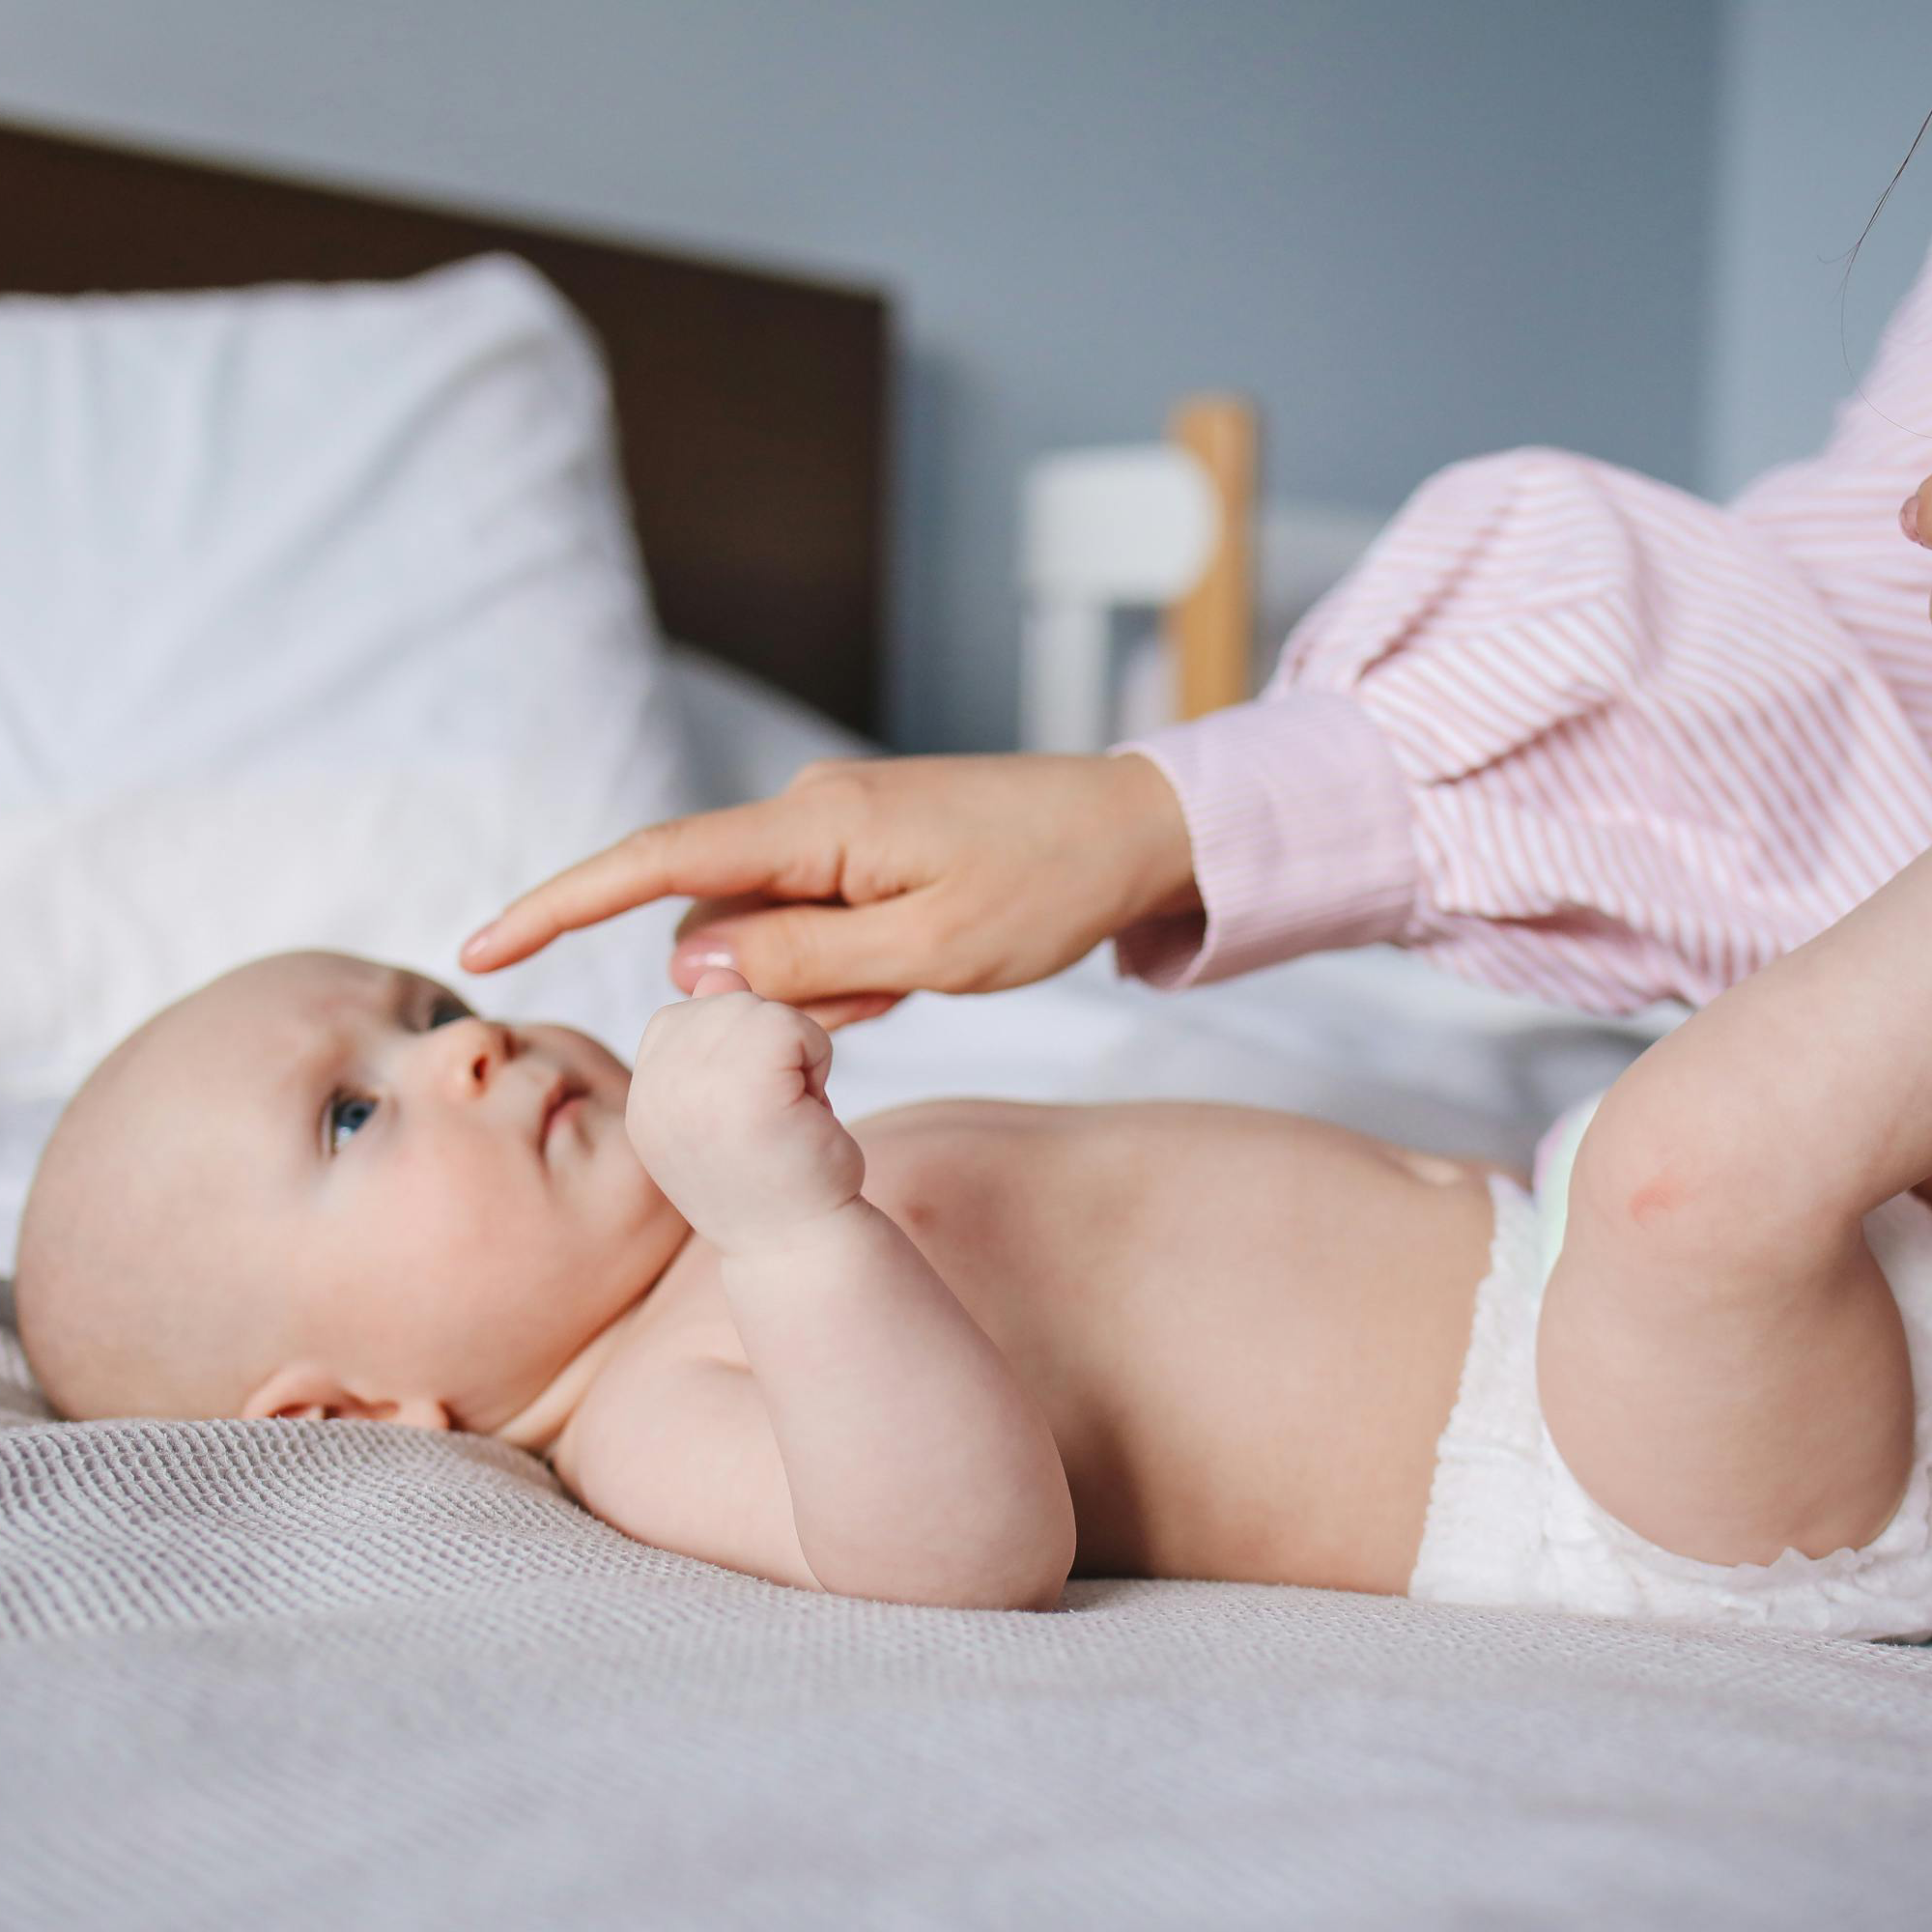 The Global Trend: Why More Consumers Are Choosing Eco-Friendly Baby Diapers